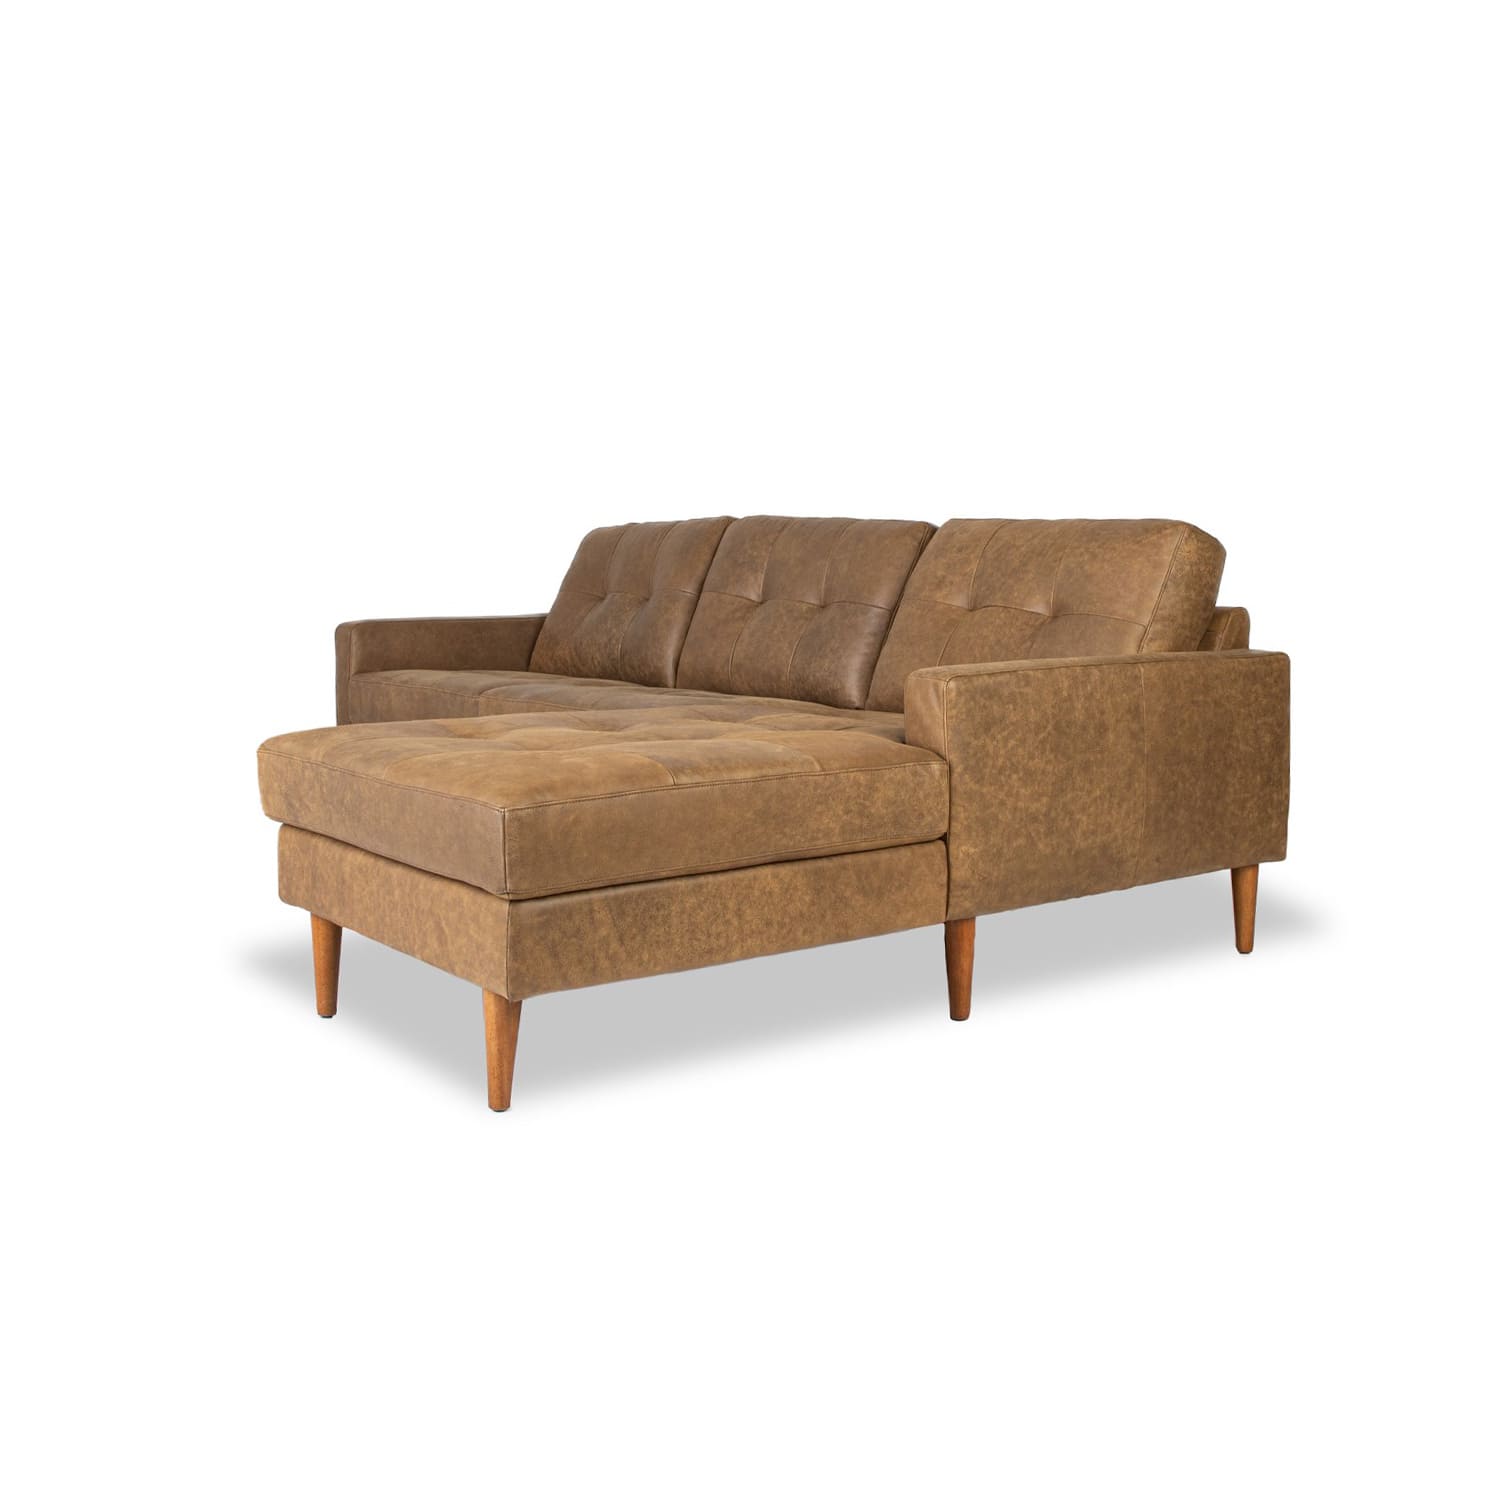 Classic Leather Right Side Facing Chaise Lounge